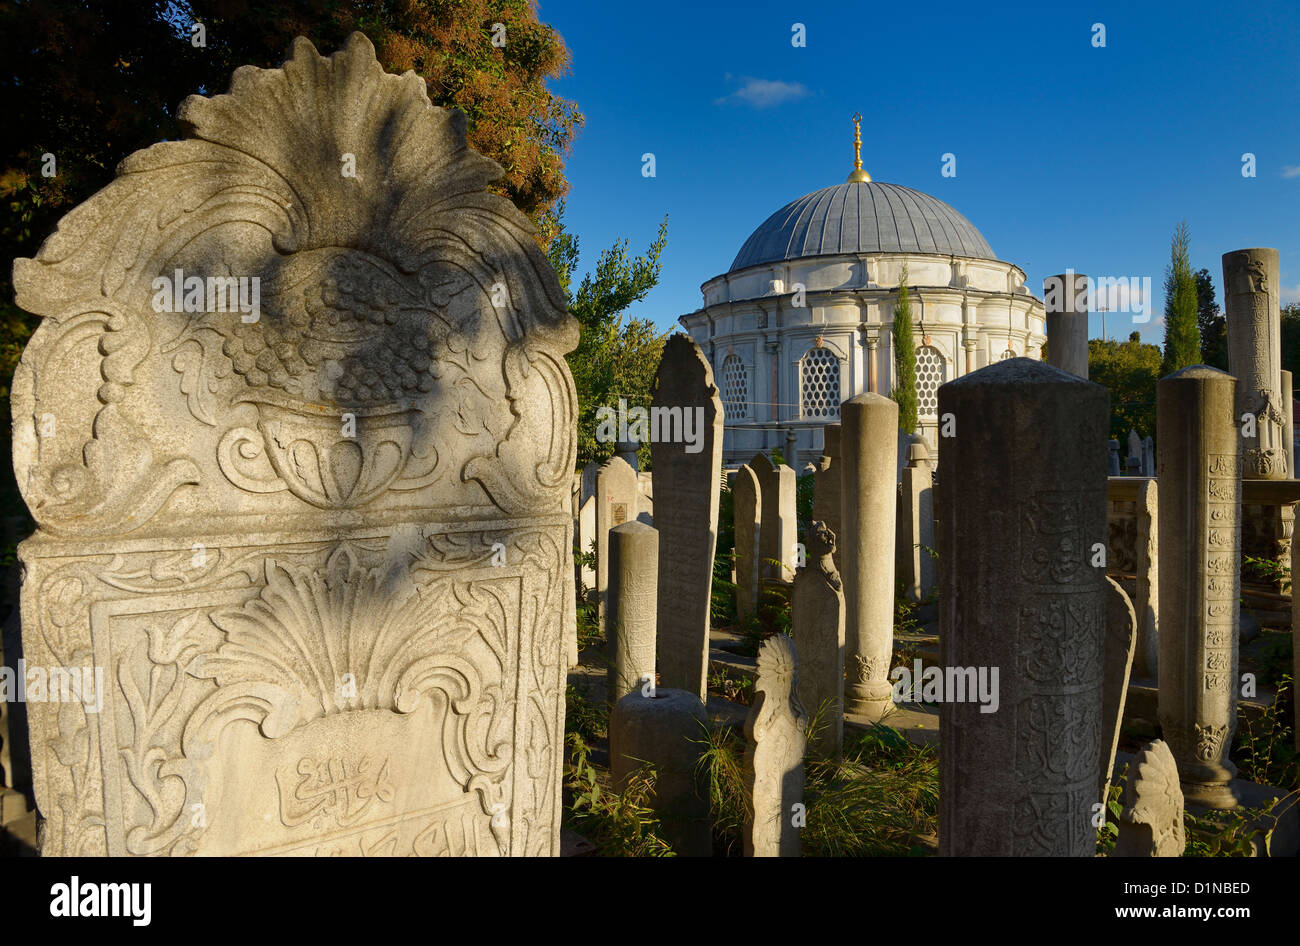 Carving on grave stones and Mausoleum in the Ottoman cemetery at Eyup Sultan Mosque Istanbul Turkey Stock Photo